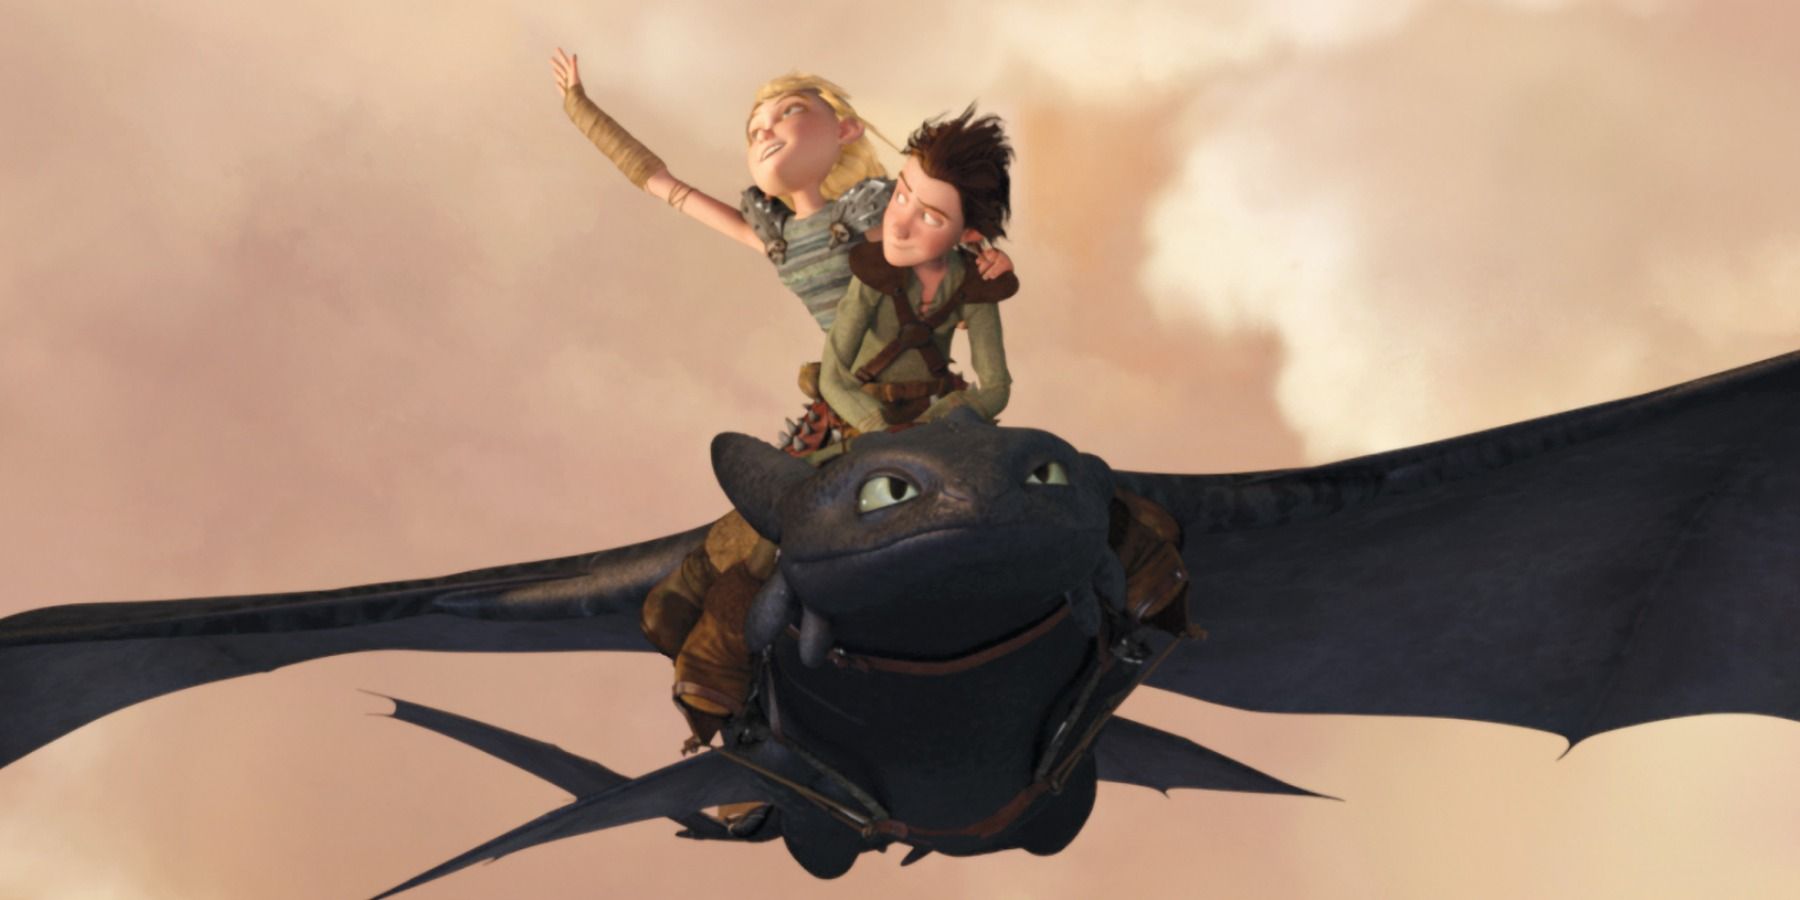 Flying on toothless